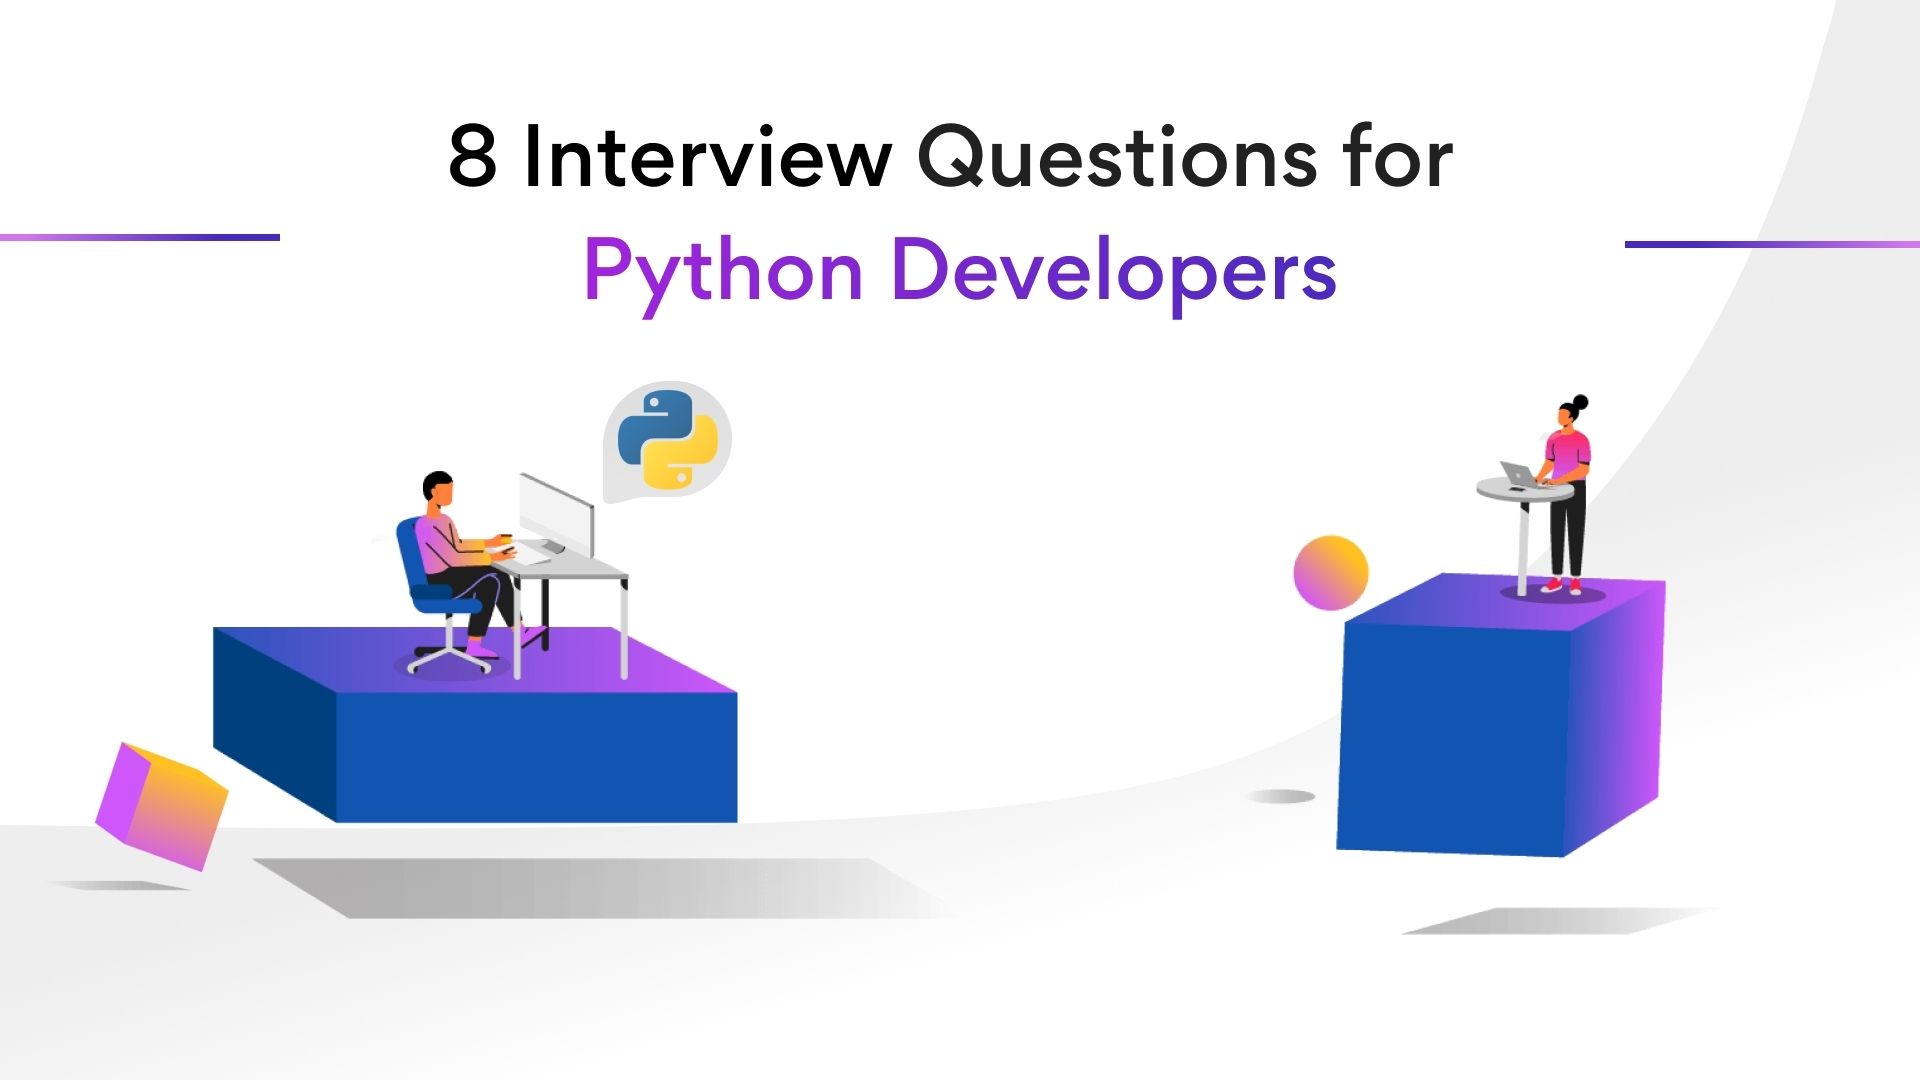 Python interview questions